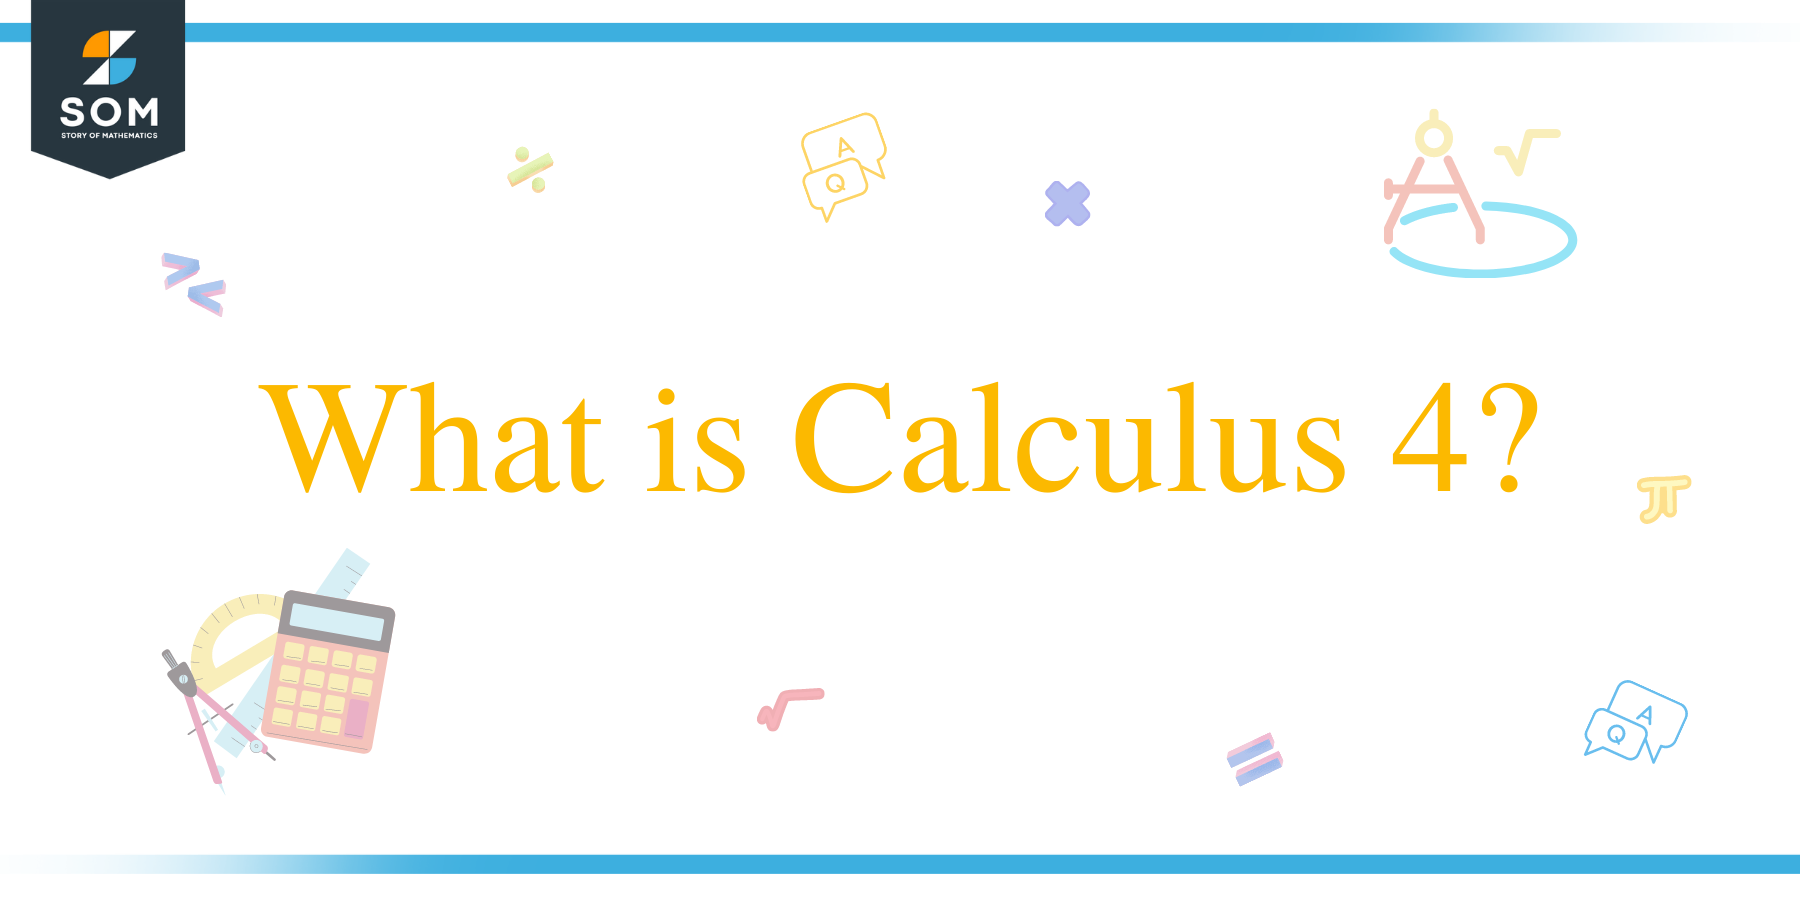 What is Calculus 4?